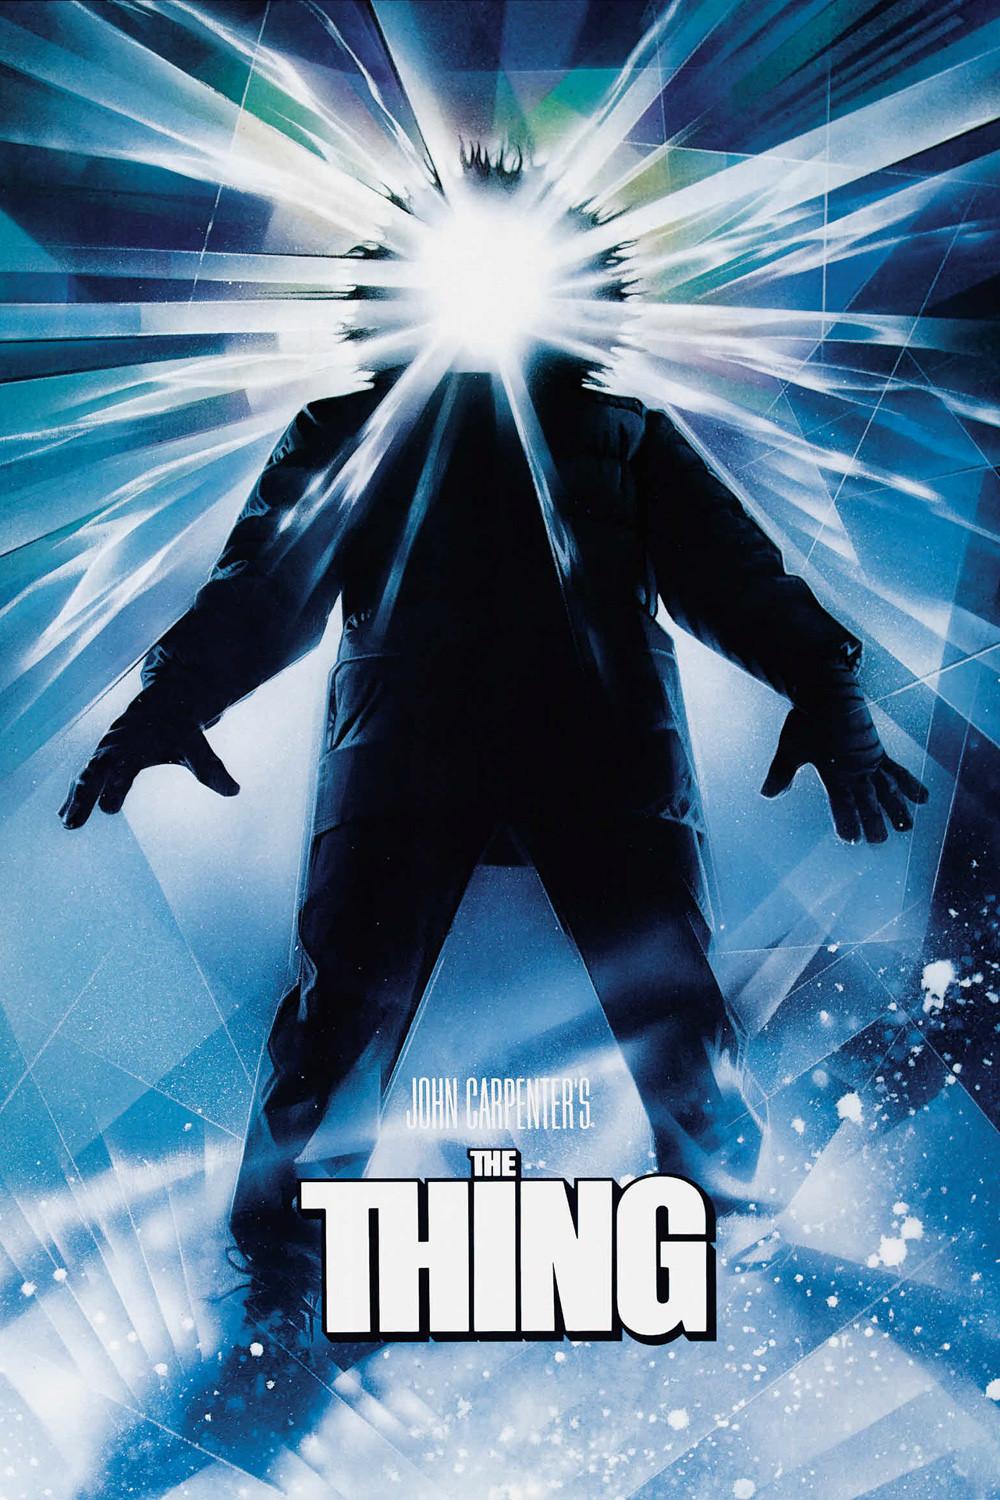 Amazing The Thing (1982) Pictures & Backgrounds